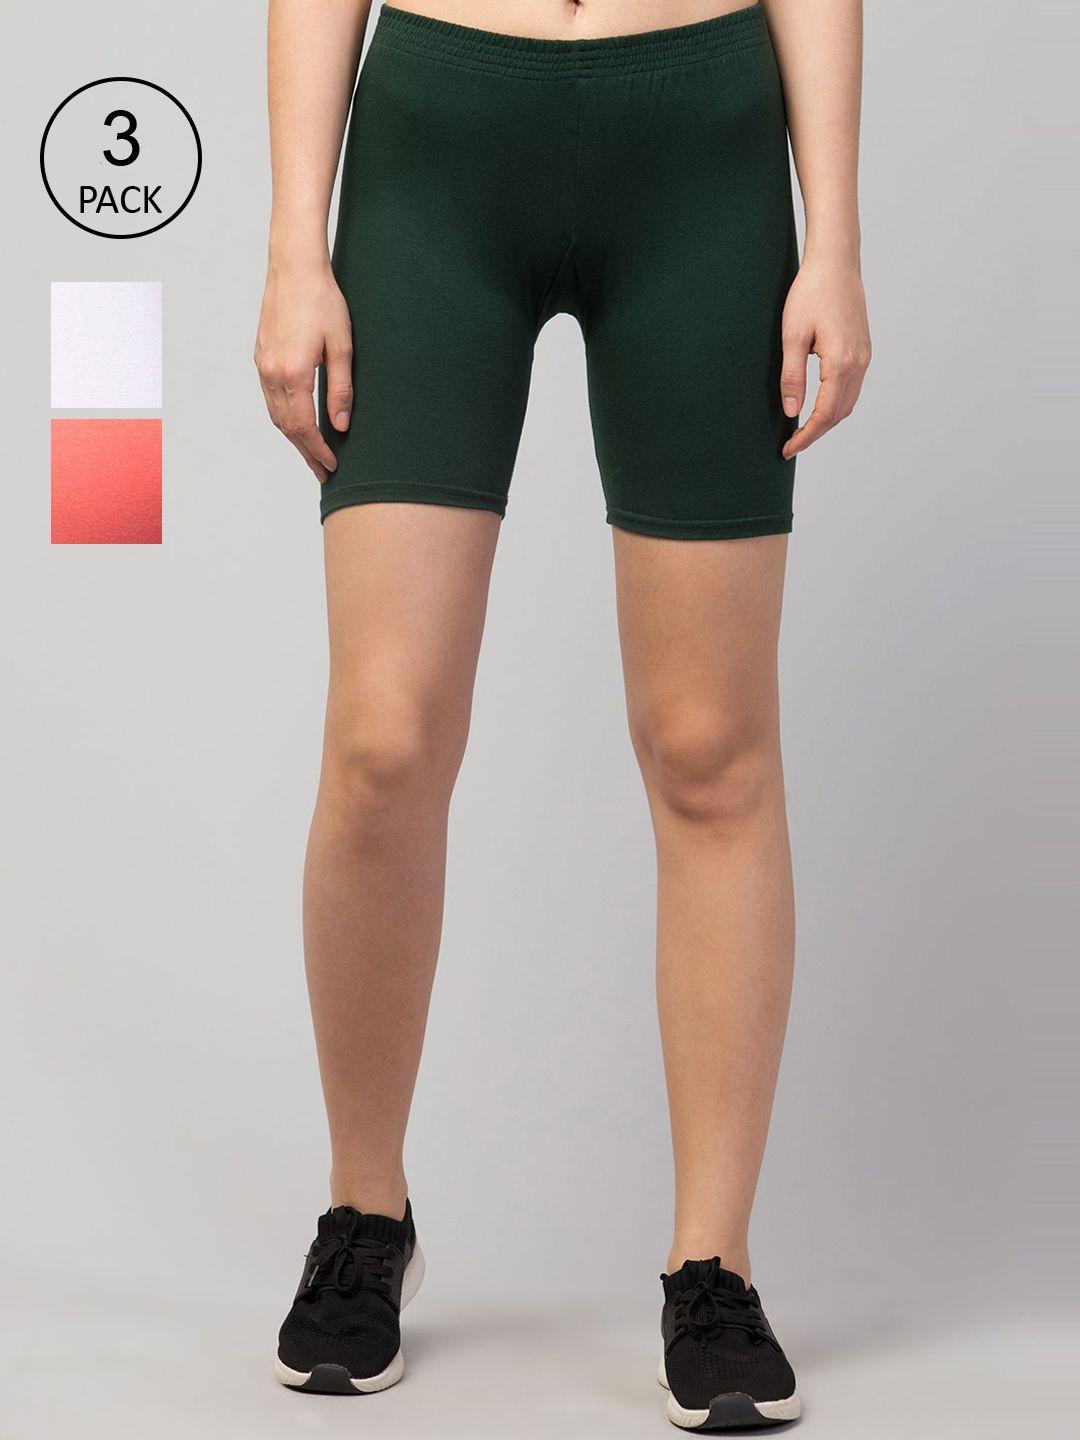 apraa-&-parma-women-pack-of-3-green-slim-fit-cycling-sports-shorts